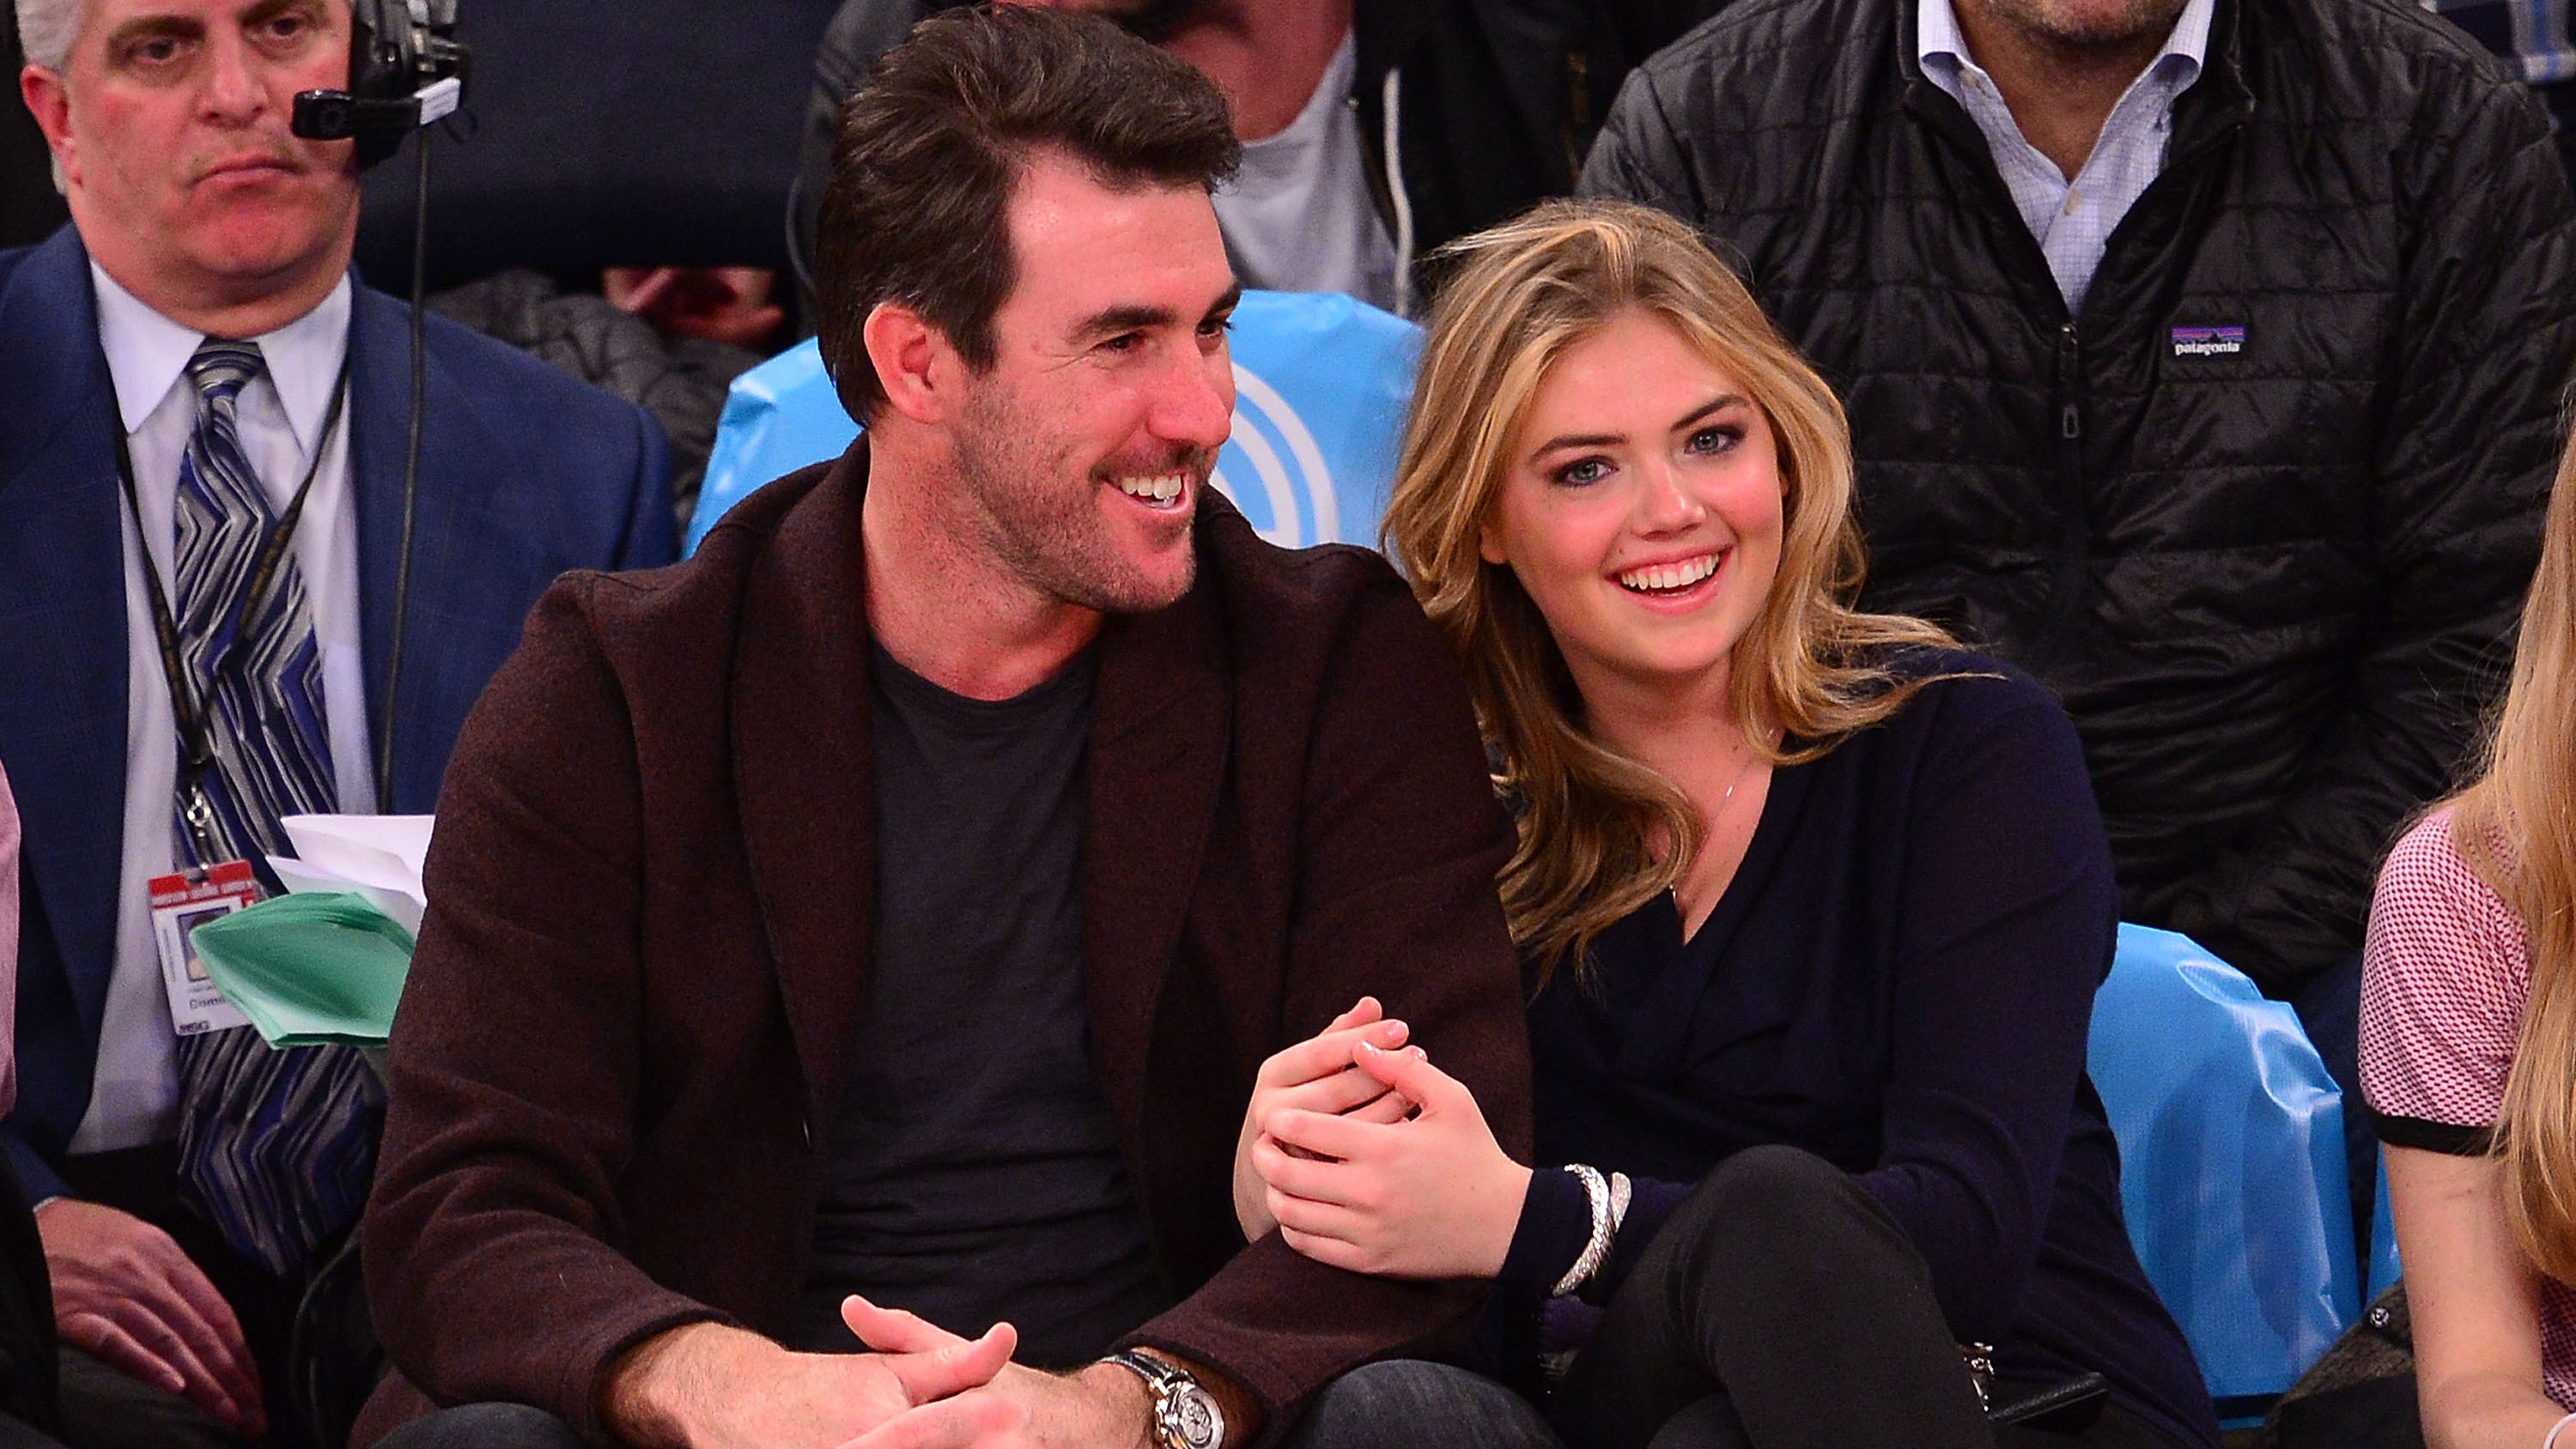 Engagement Official, Kate Upton Destined For Baseball WAGs Hall Of